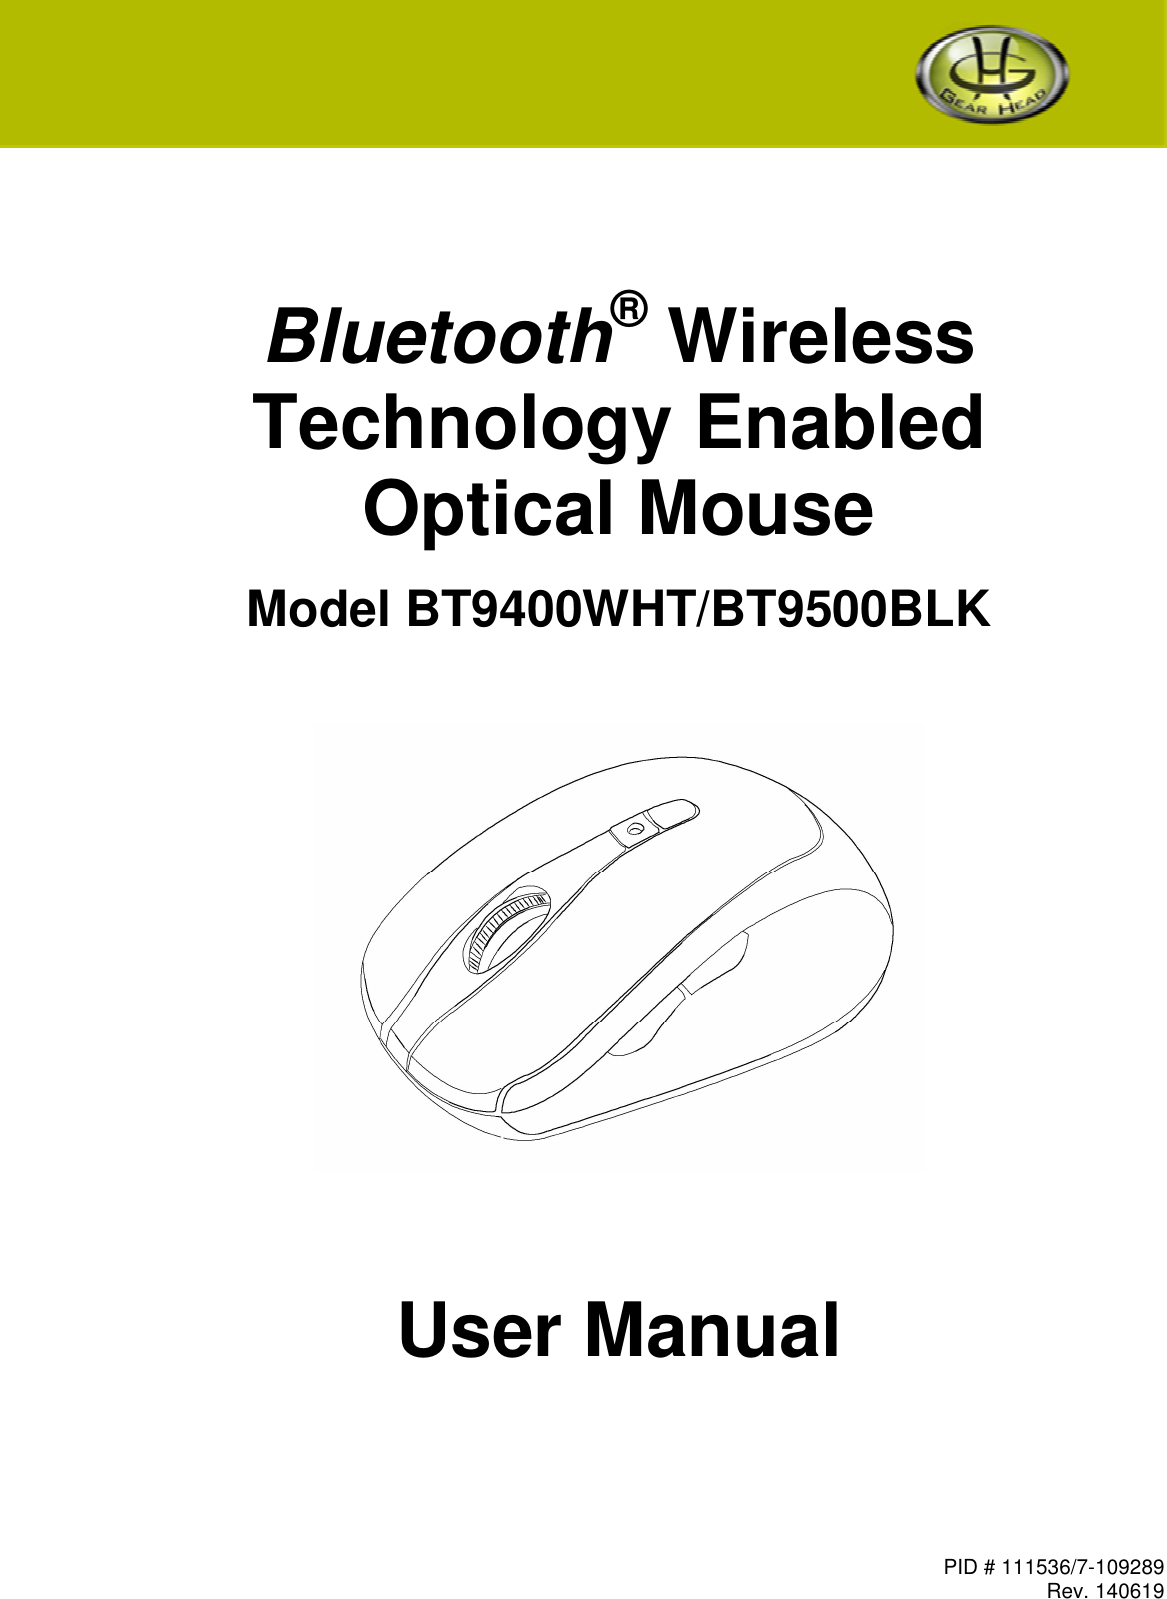 PID # 111536/7-109289 Rev. 140619      Bluetooth® Wireless Technology Enabled Optical Mouse  Model BT9400WHT/BT9500BLK         User Manual   